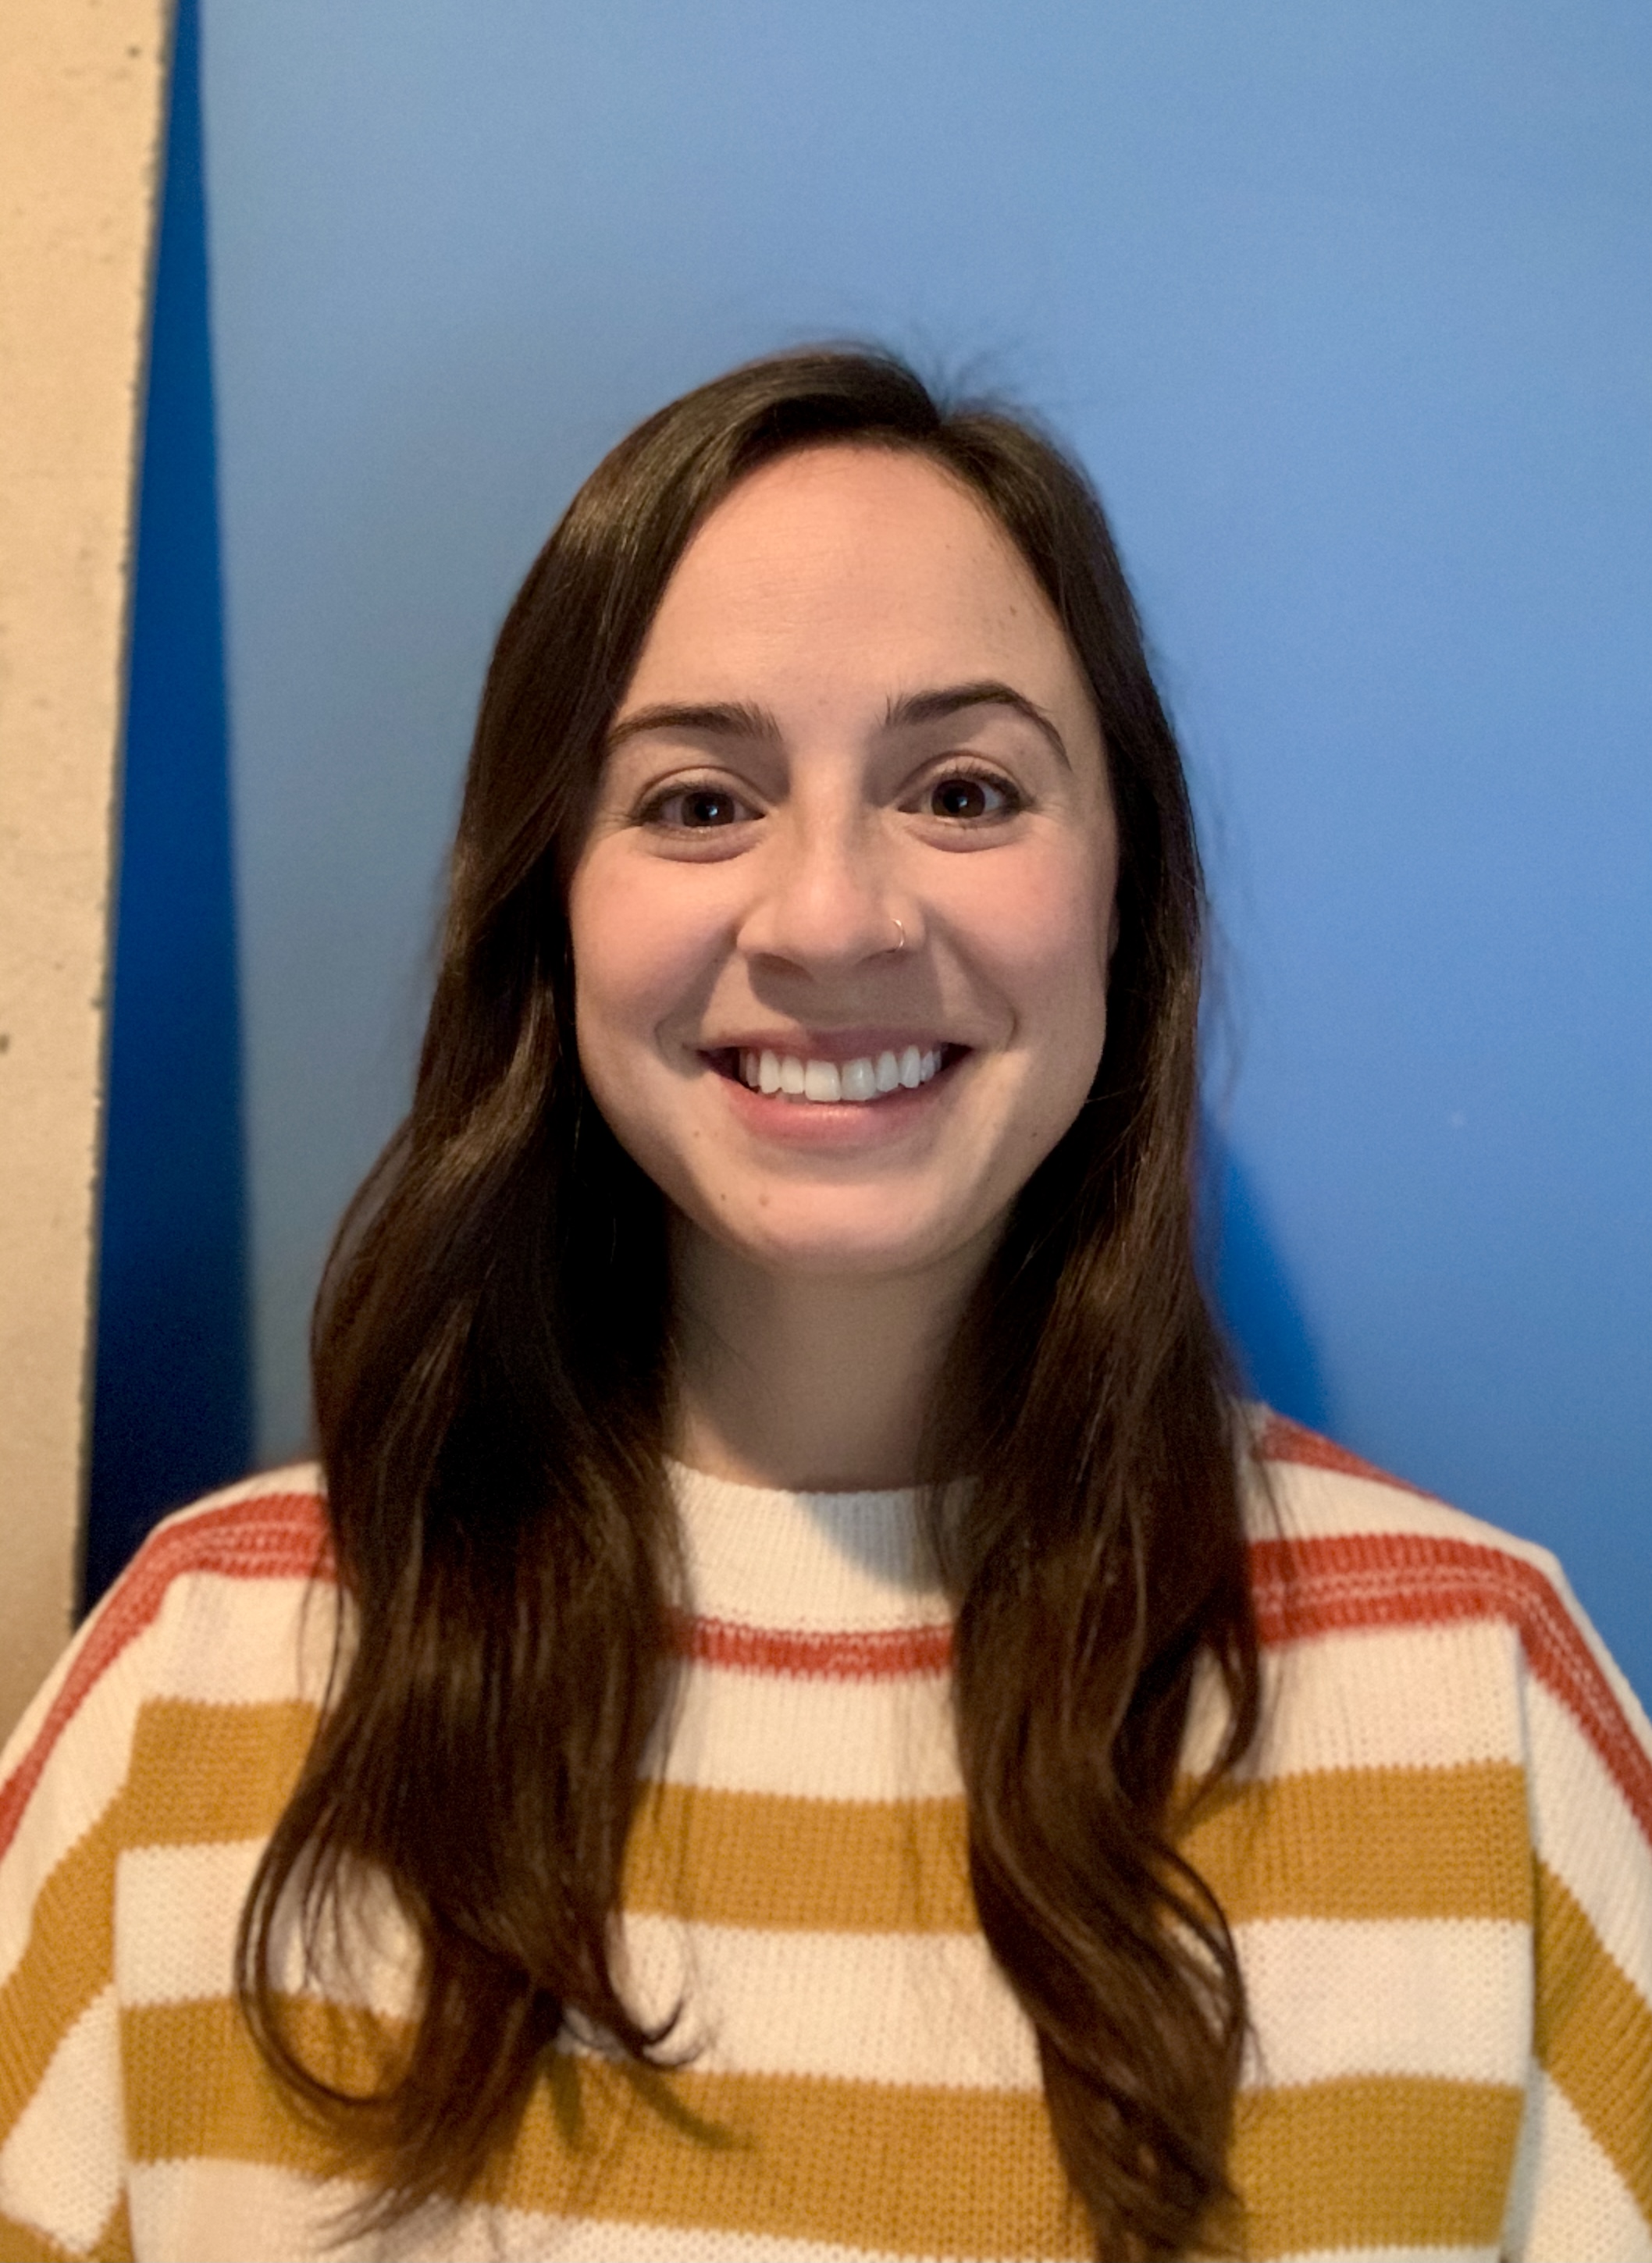 Rachel Heiss is smiling at the camera, wearing an orange, yellow and white striped sweater and standing in front of a blue wall.